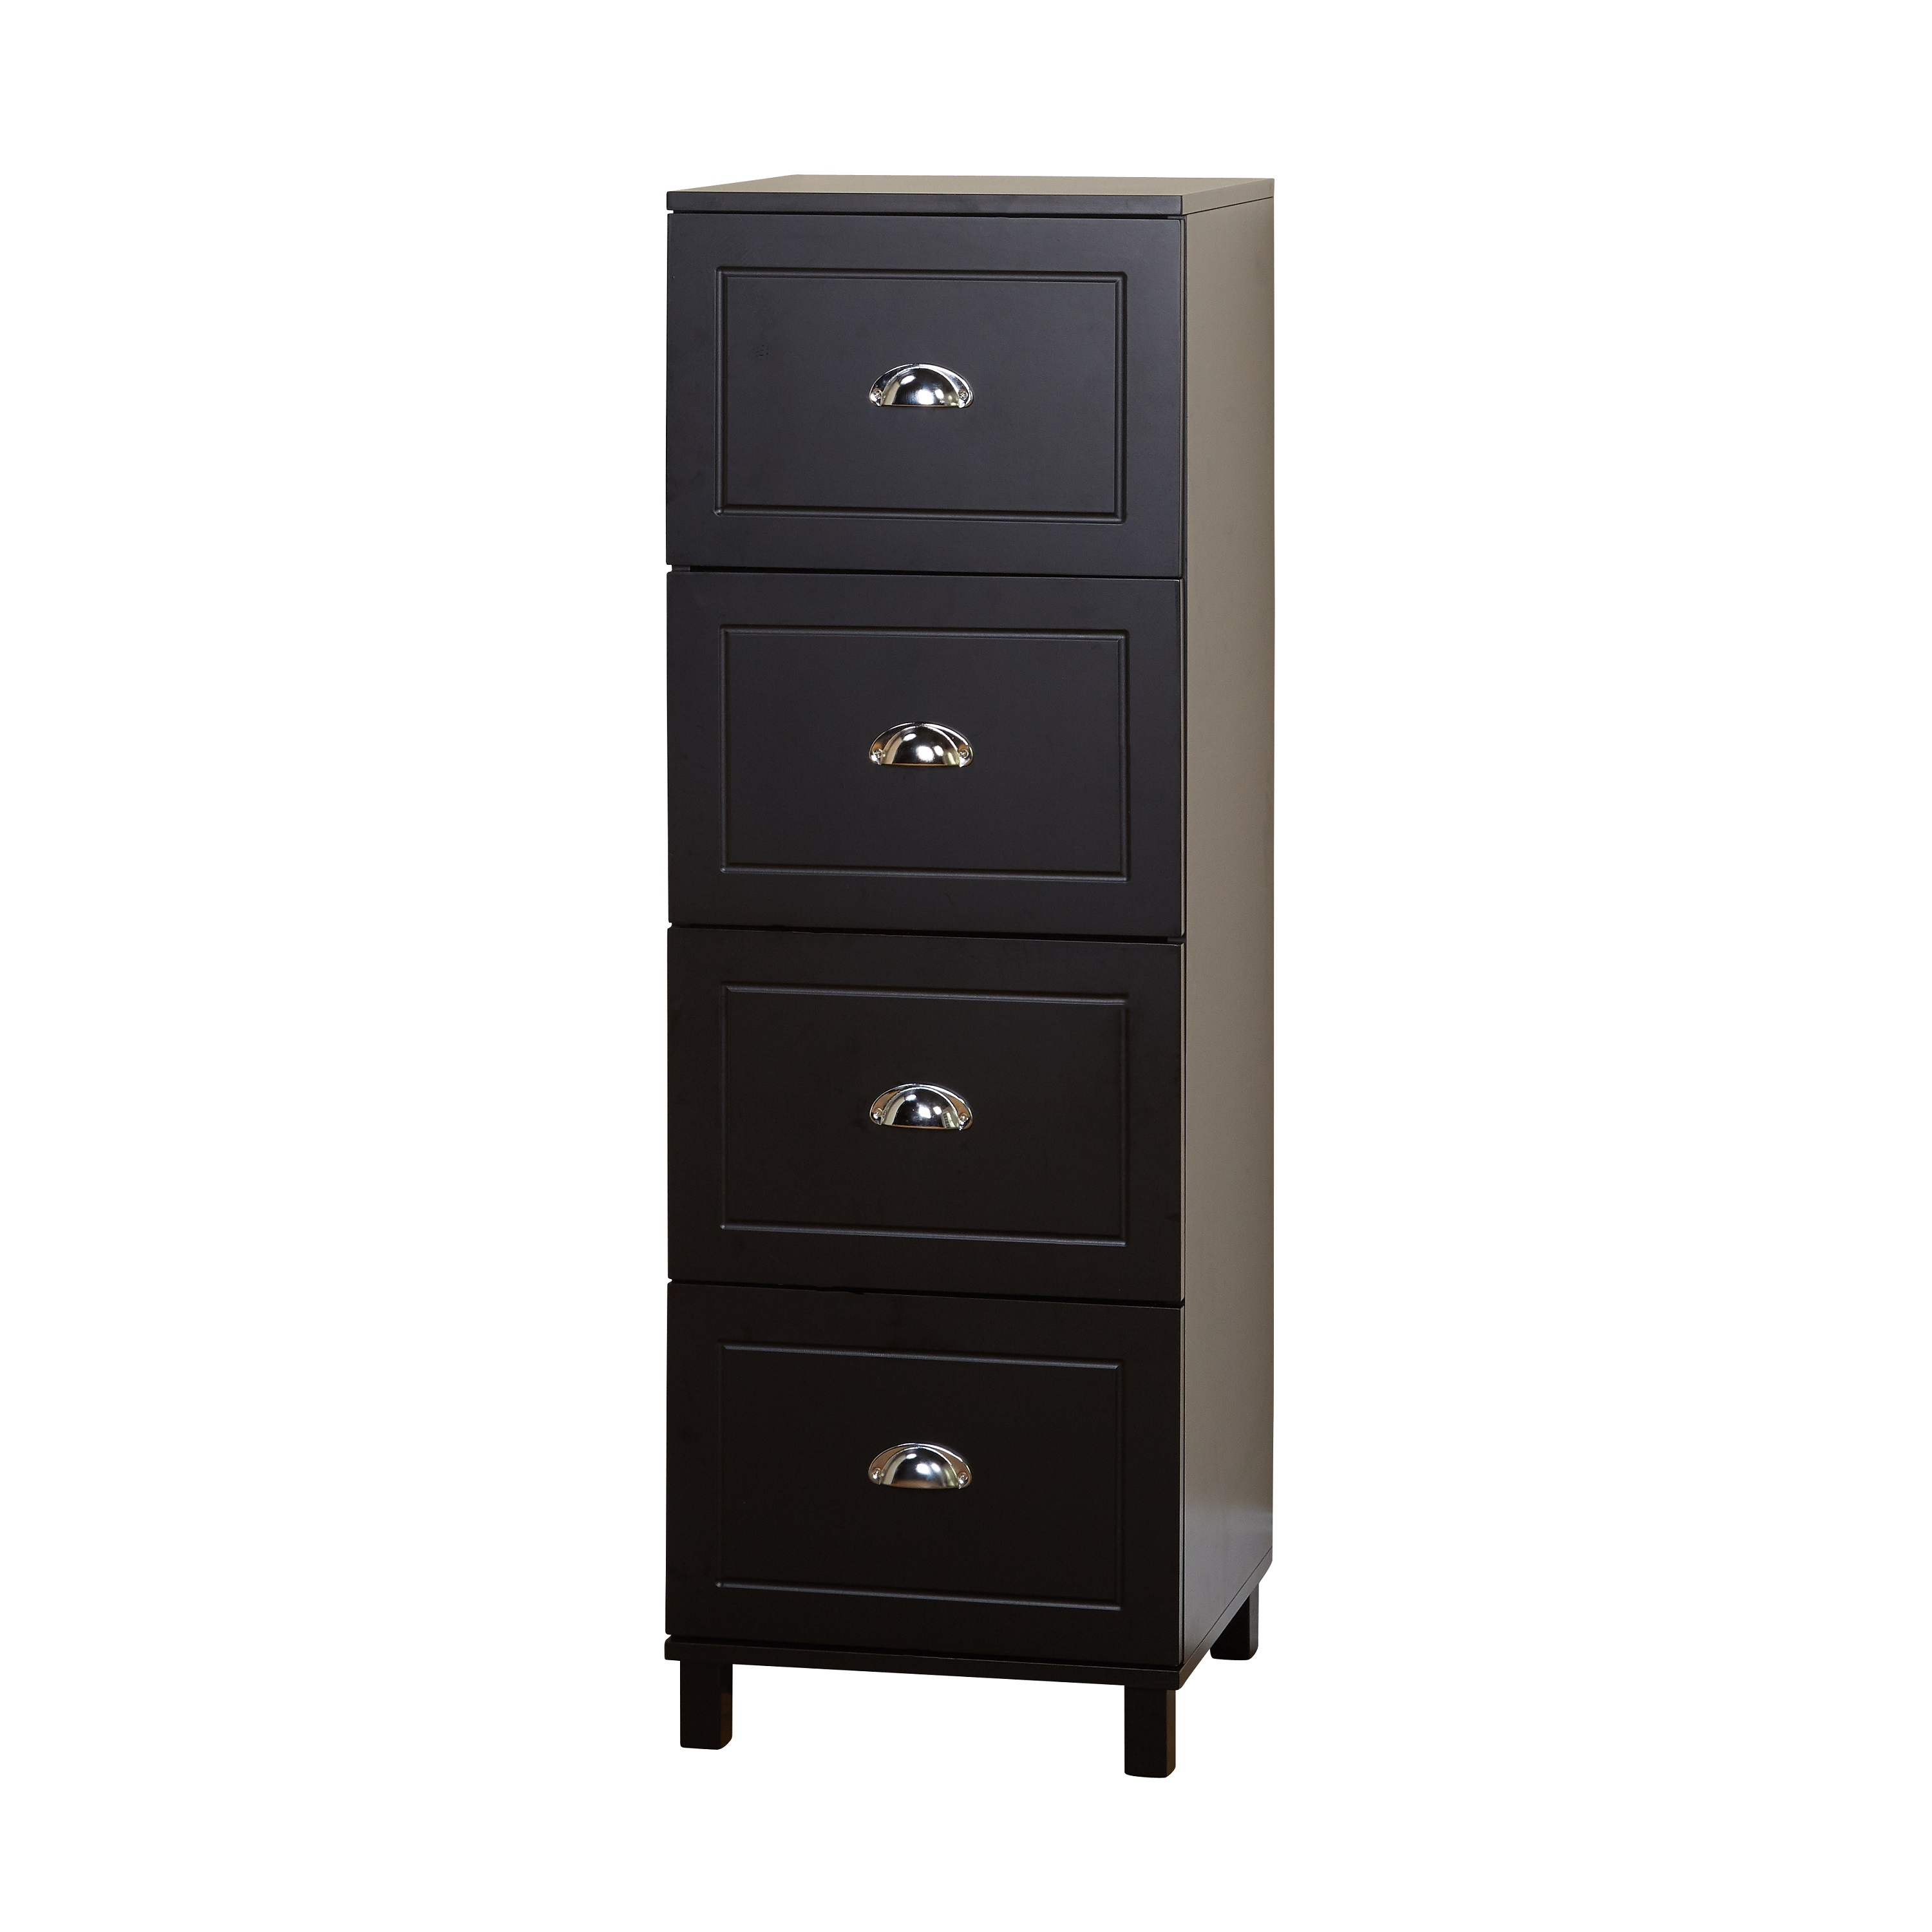 Bradley 4 Drawer Vertical Wood Filing Cabinet Black Walmart pertaining to proportions 3000 X 3000